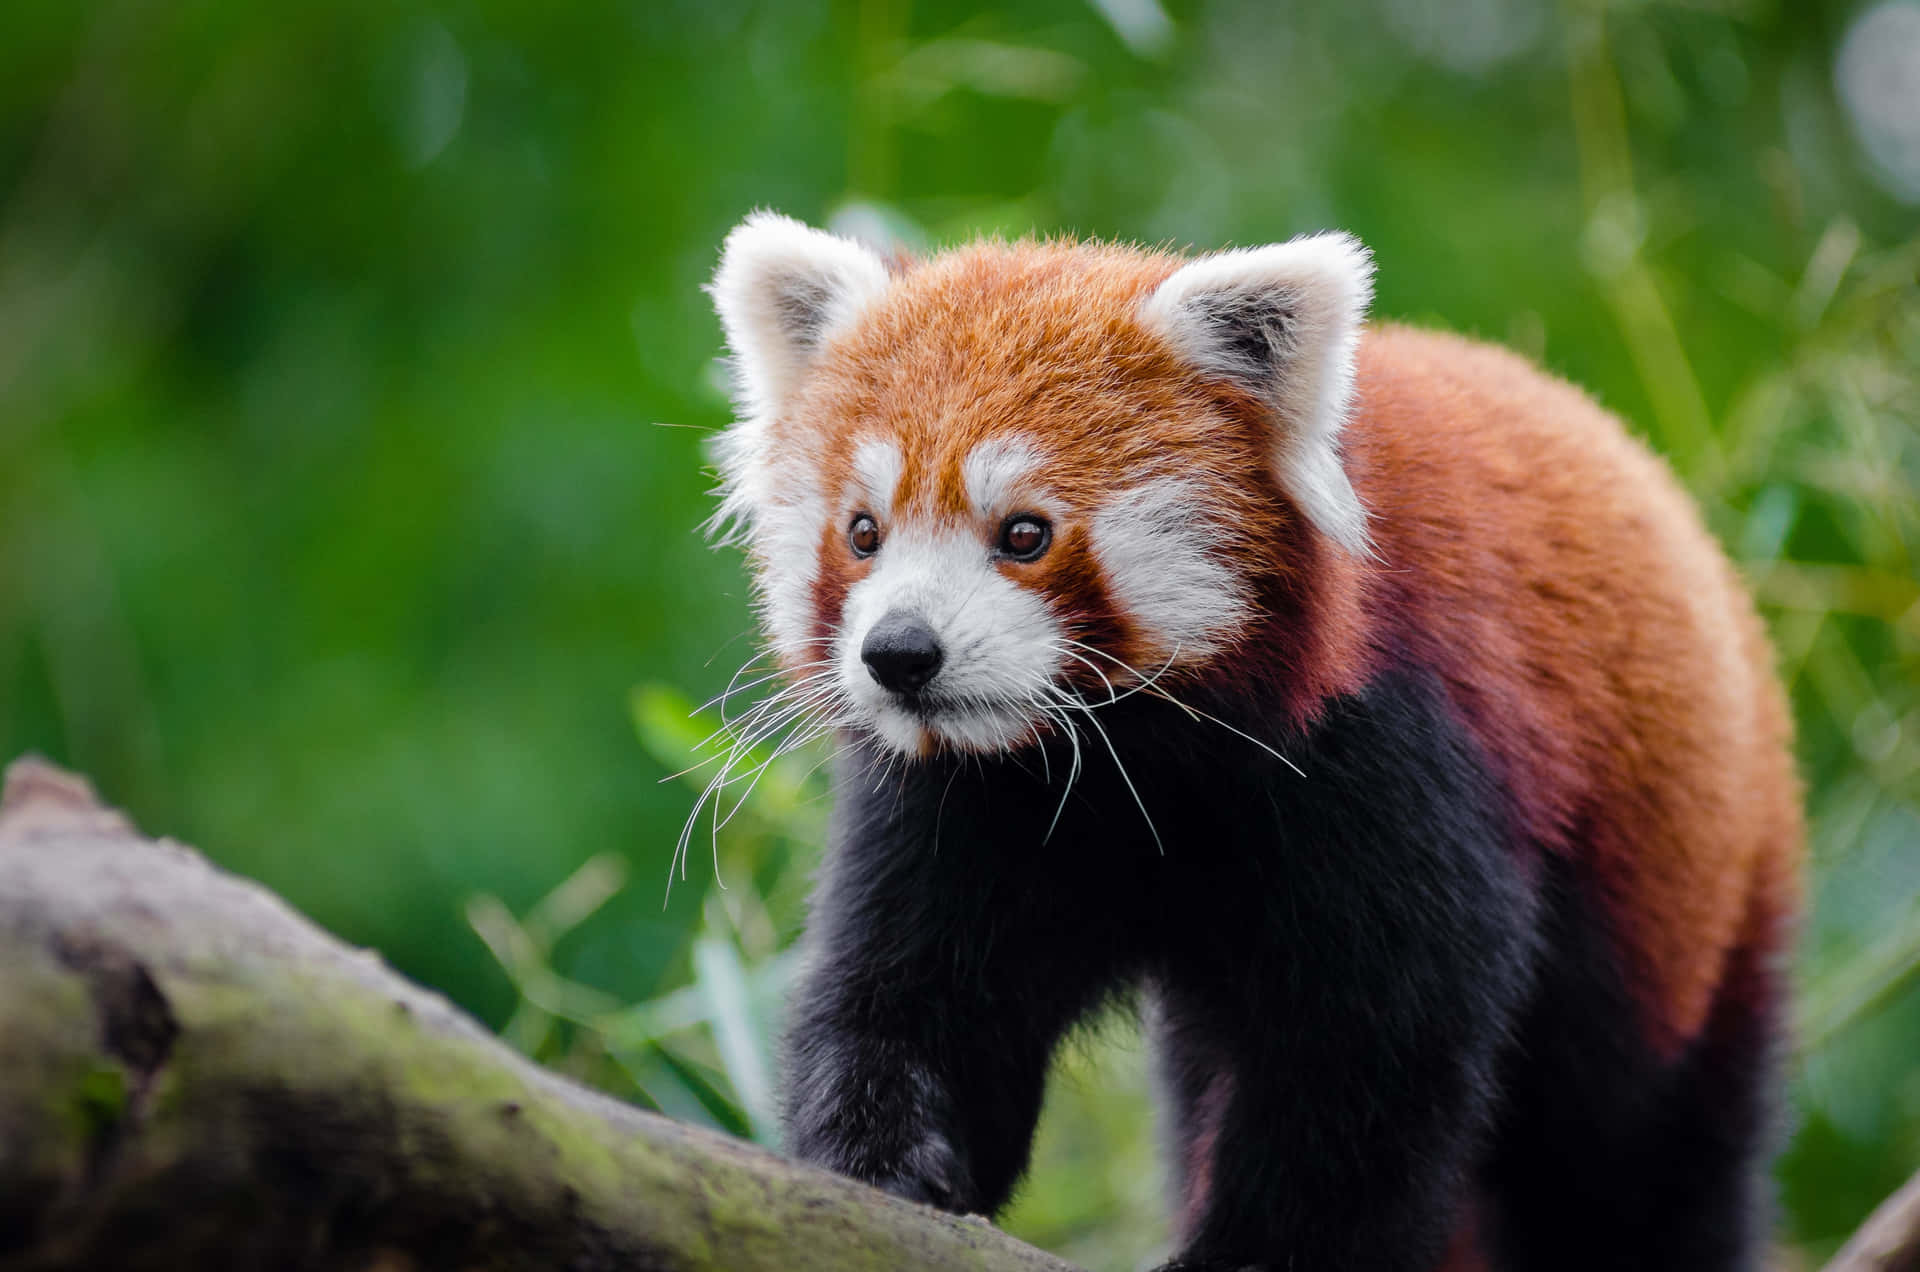 The adorable red panda takes a rest against a green background.